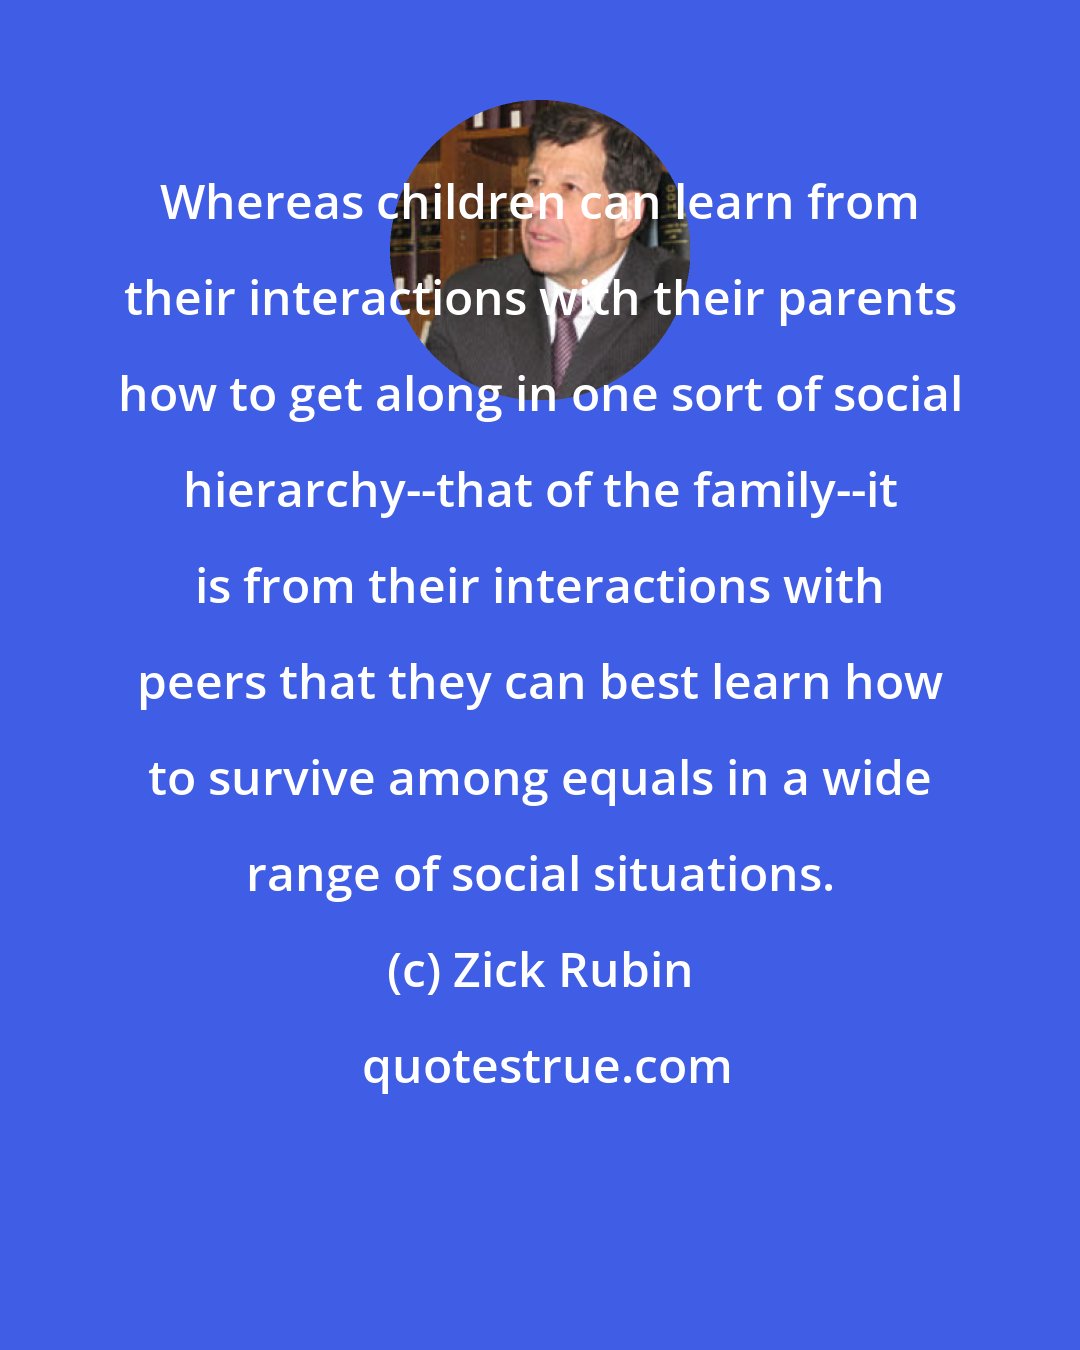 Zick Rubin: Whereas children can learn from their interactions with their parents how to get along in one sort of social hierarchy--that of the family--it is from their interactions with peers that they can best learn how to survive among equals in a wide range of social situations.